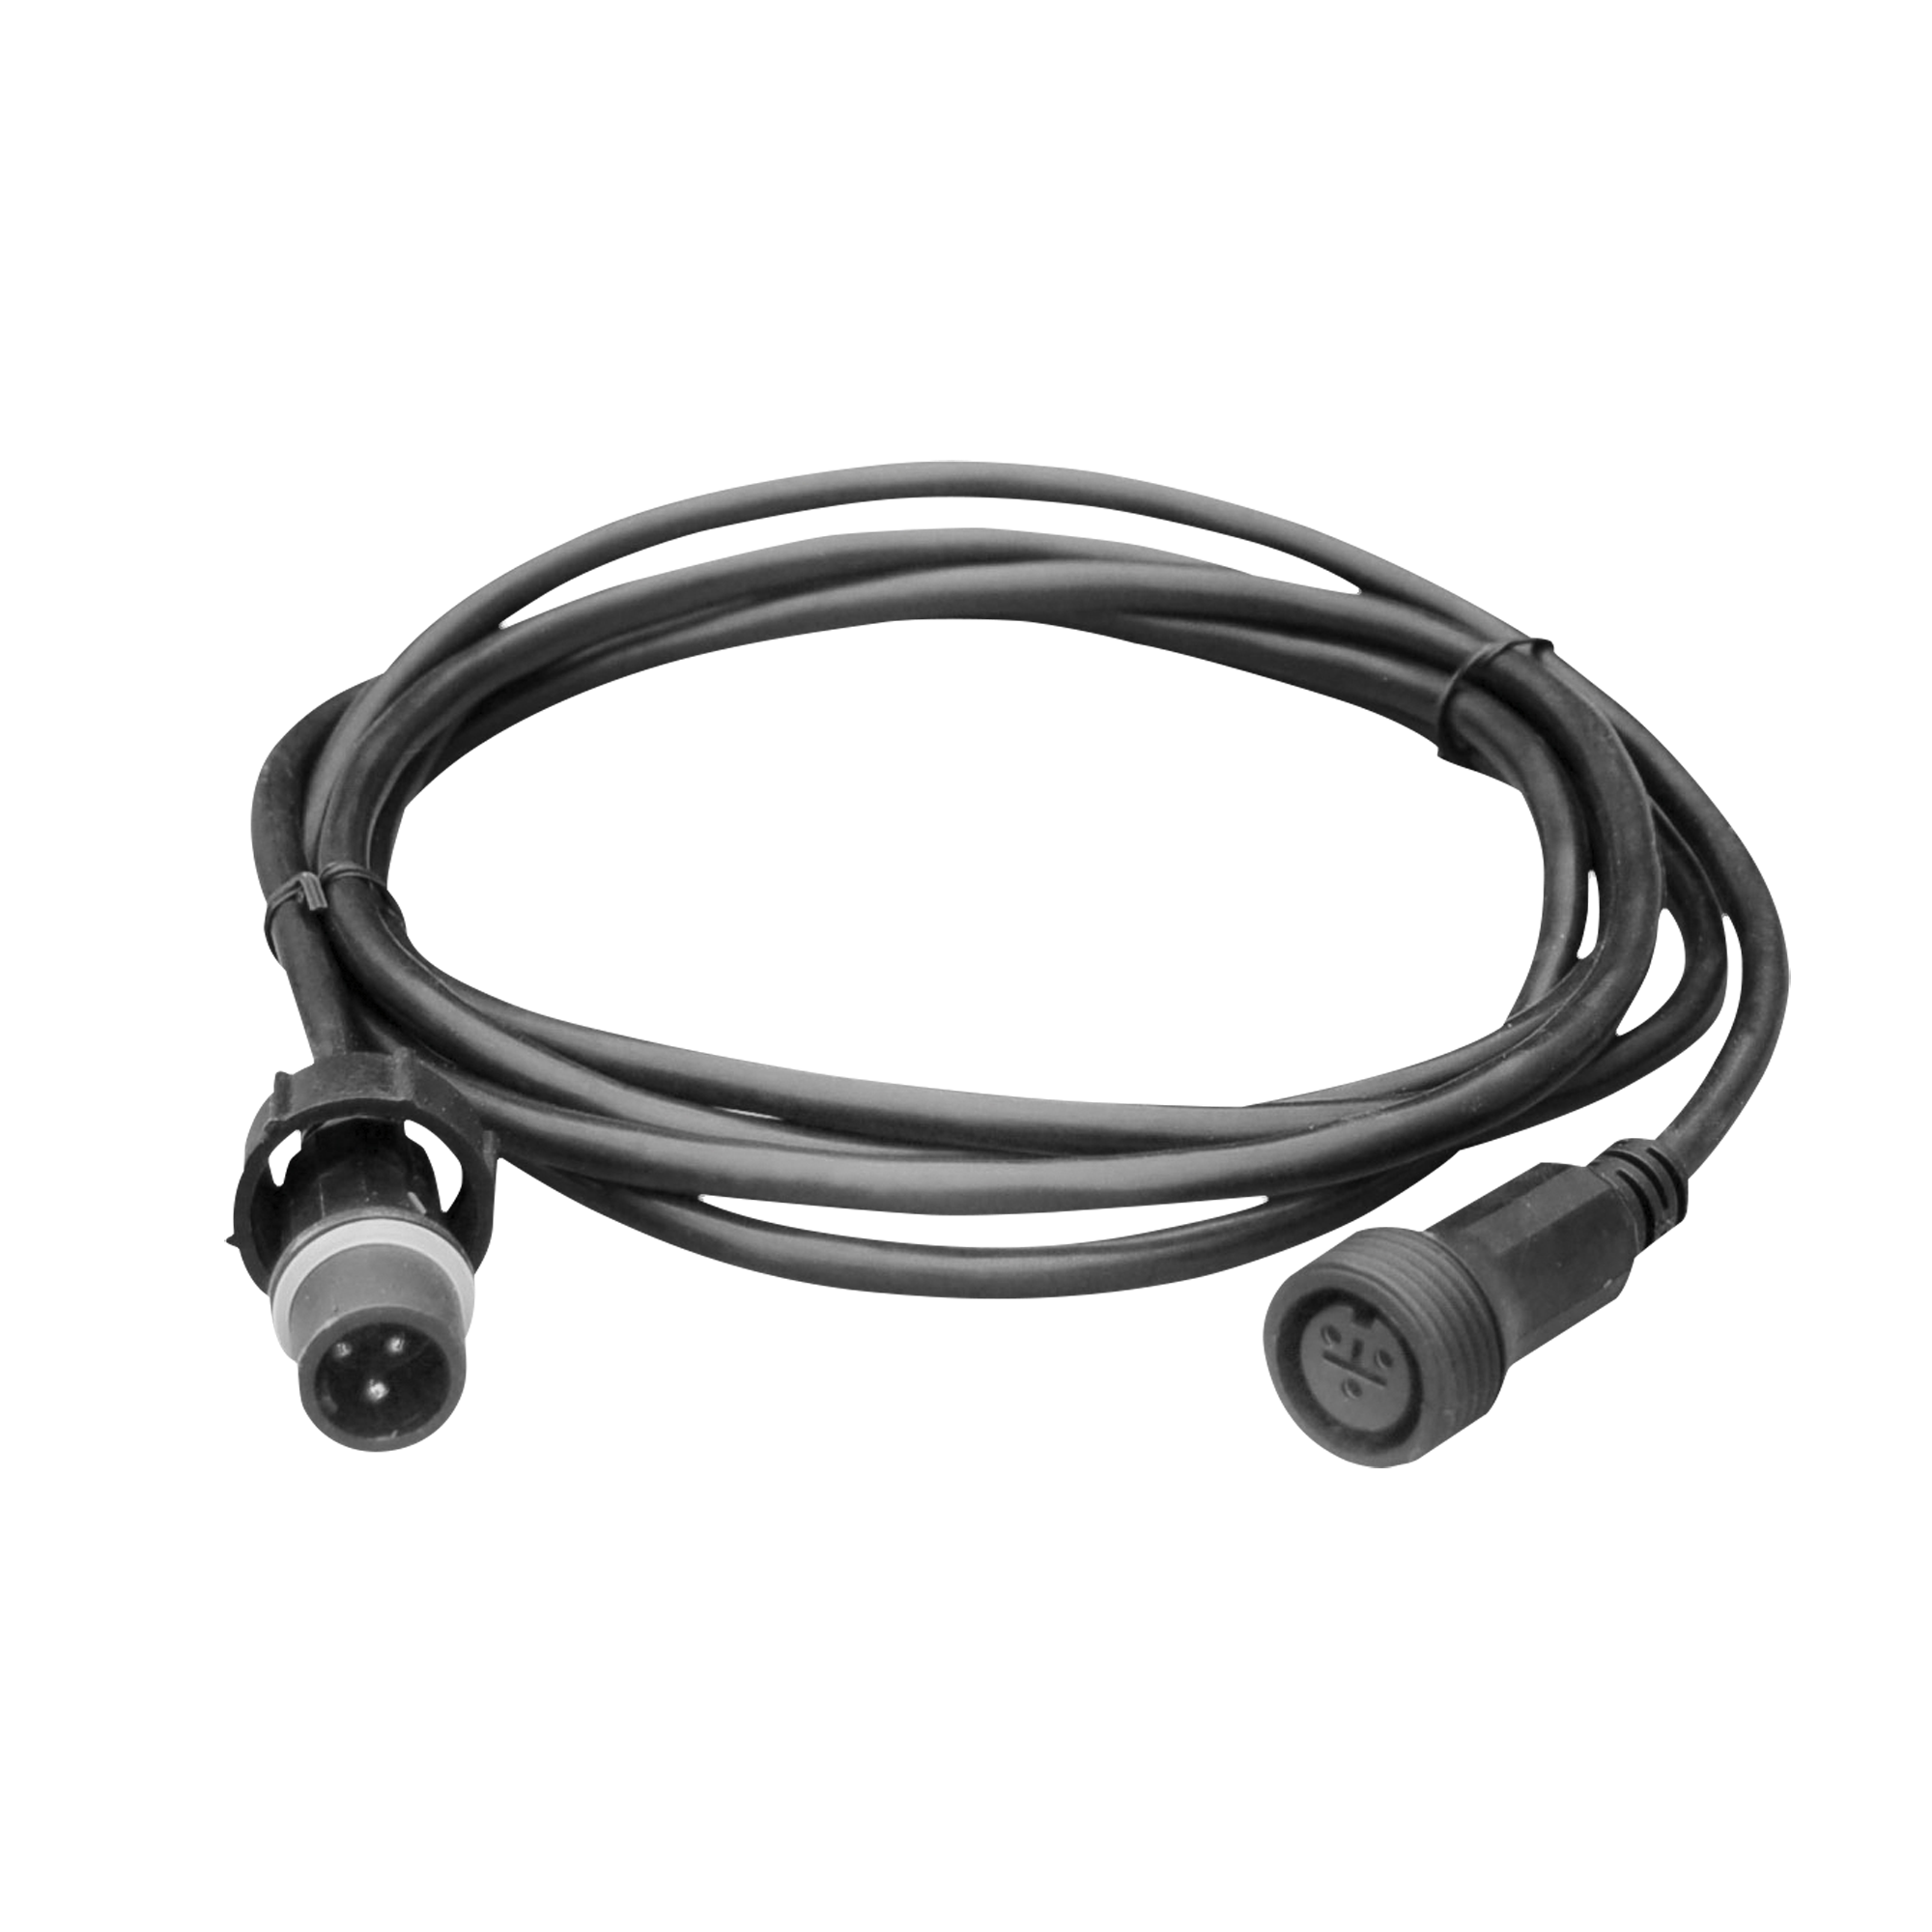 IP65 Data extensioncable for Spectral Series - Onlinediscowinkel.nl